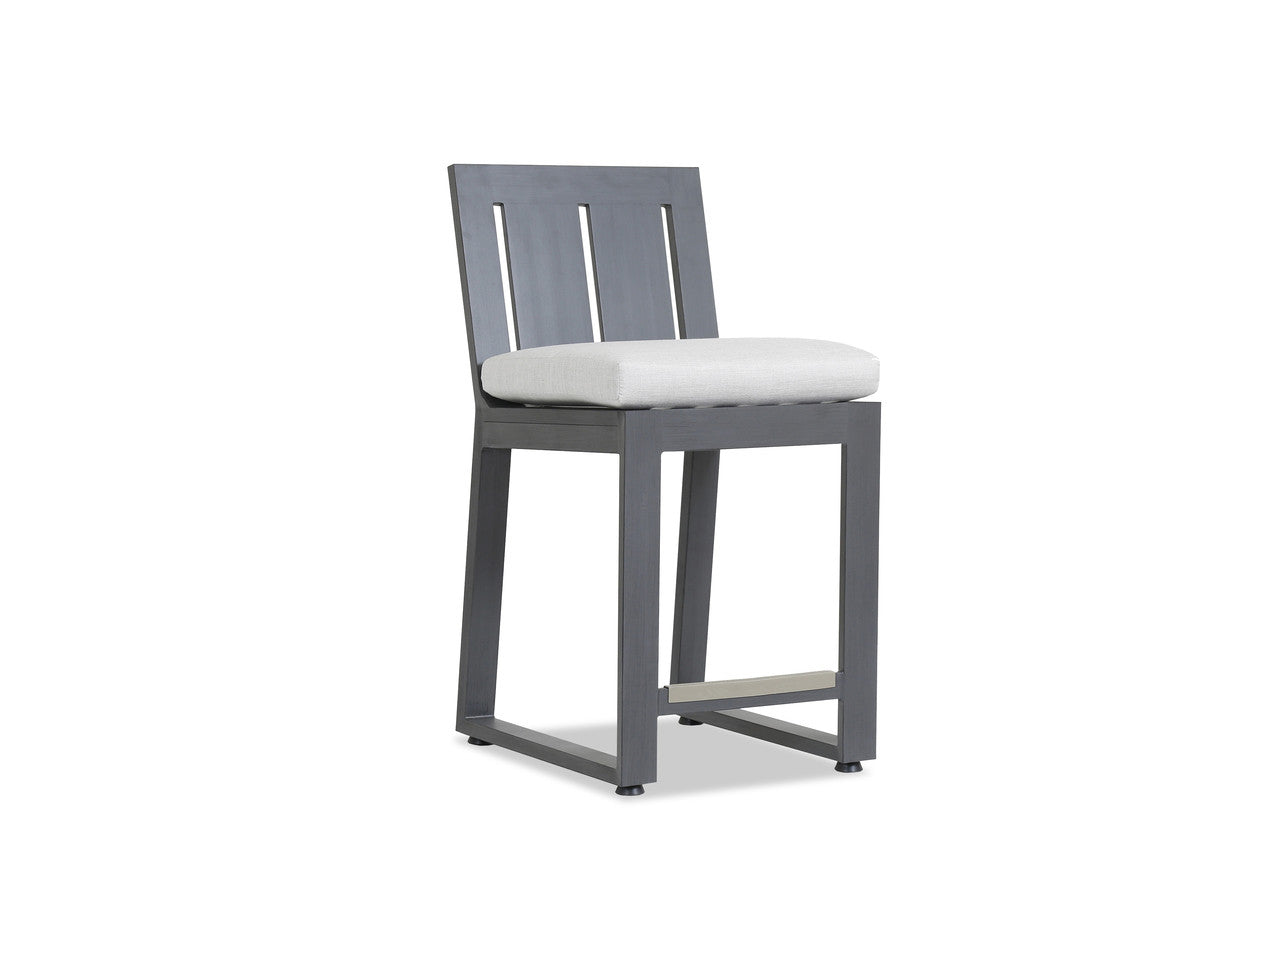 Replacement Cushions for Sunset West Redondo Counter Stool